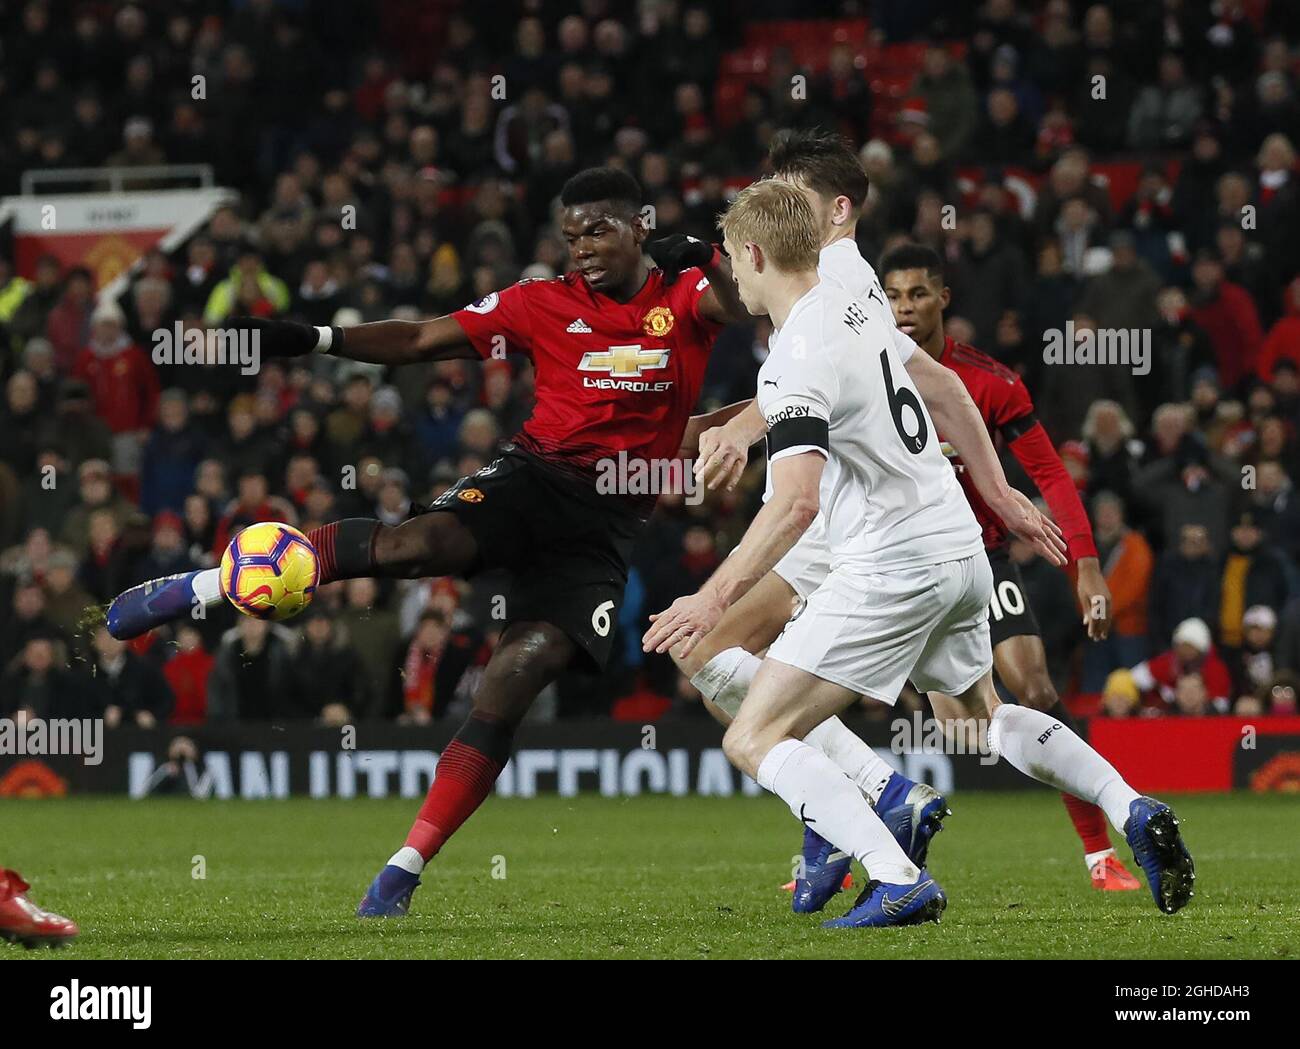 Paul Pogba of Manchester United produces a half volley during the